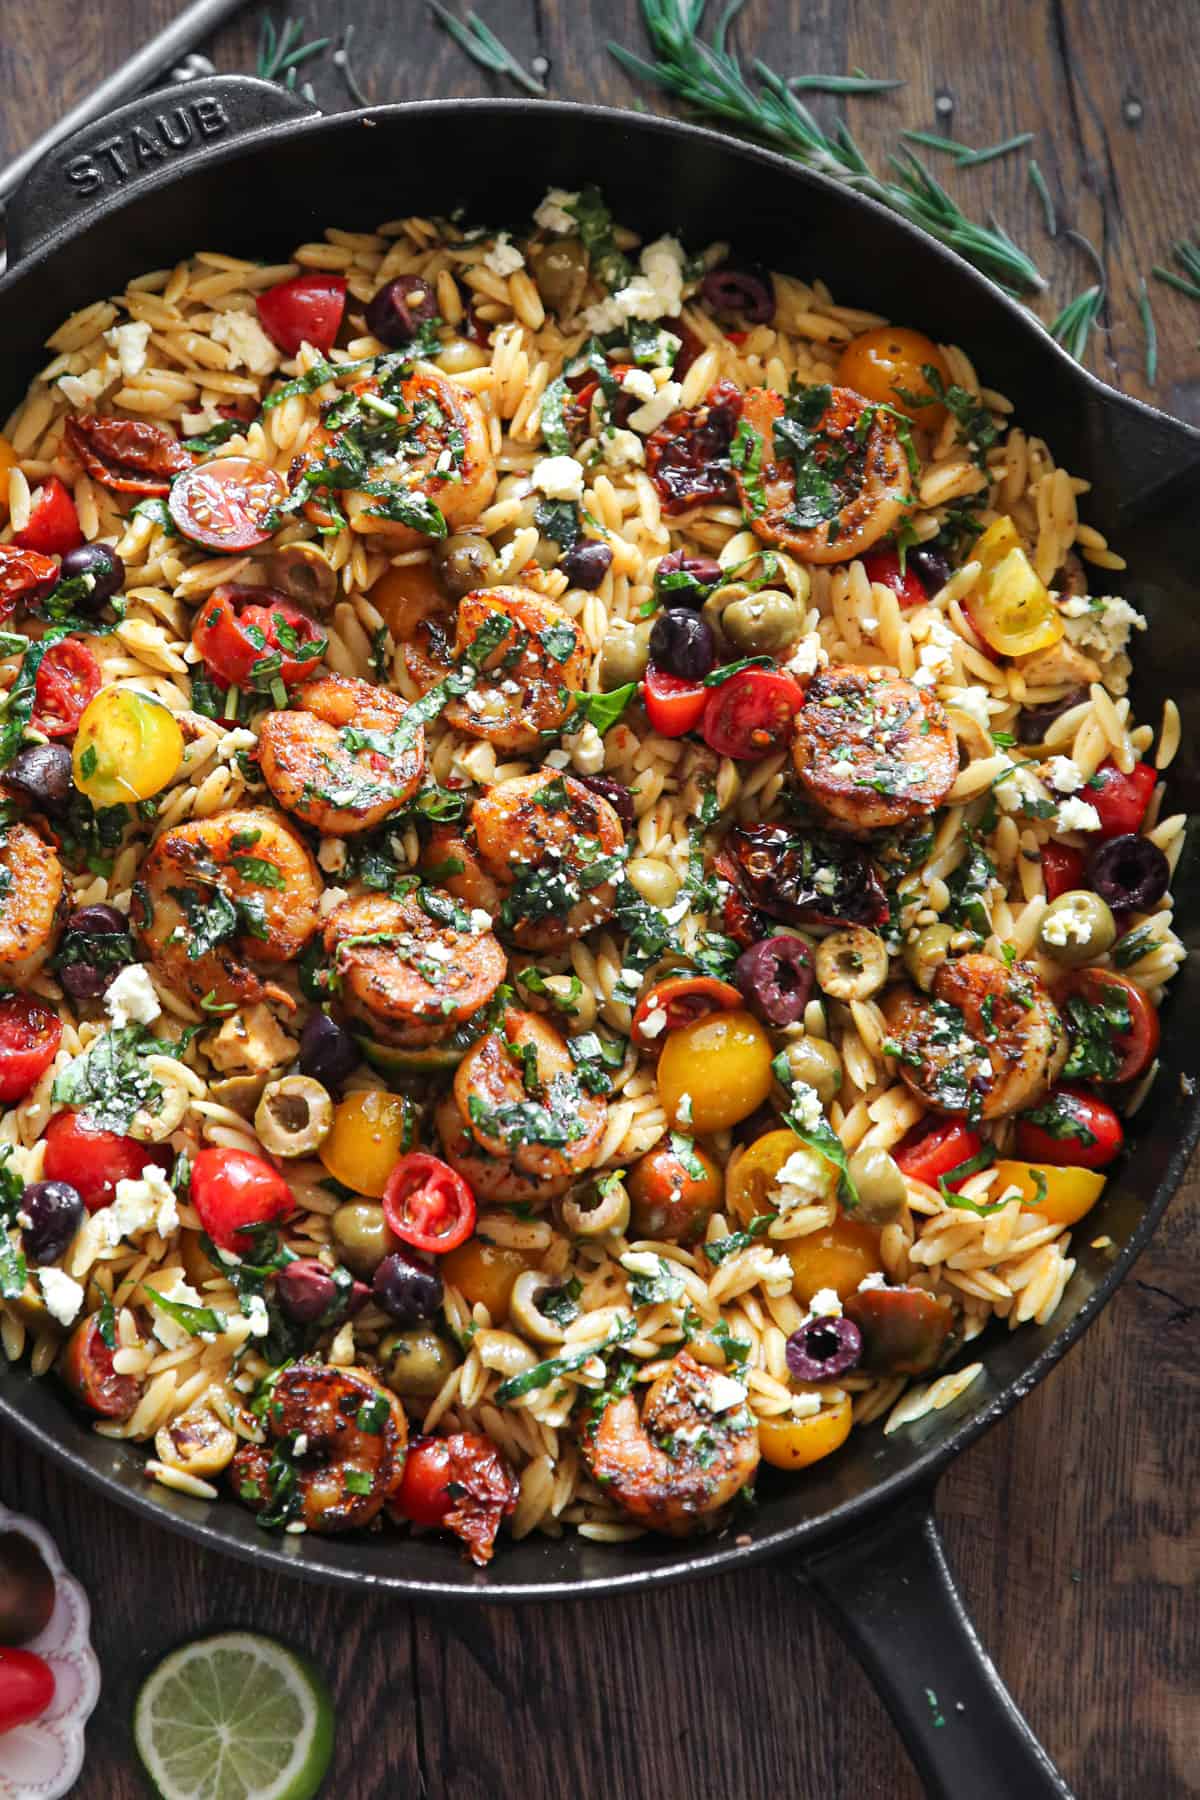 Greek Shrimp with Orzo, Feta, Olives, Sun-Dried Tomatoes, Cherry Tomatoes - in a cast iron skillet.